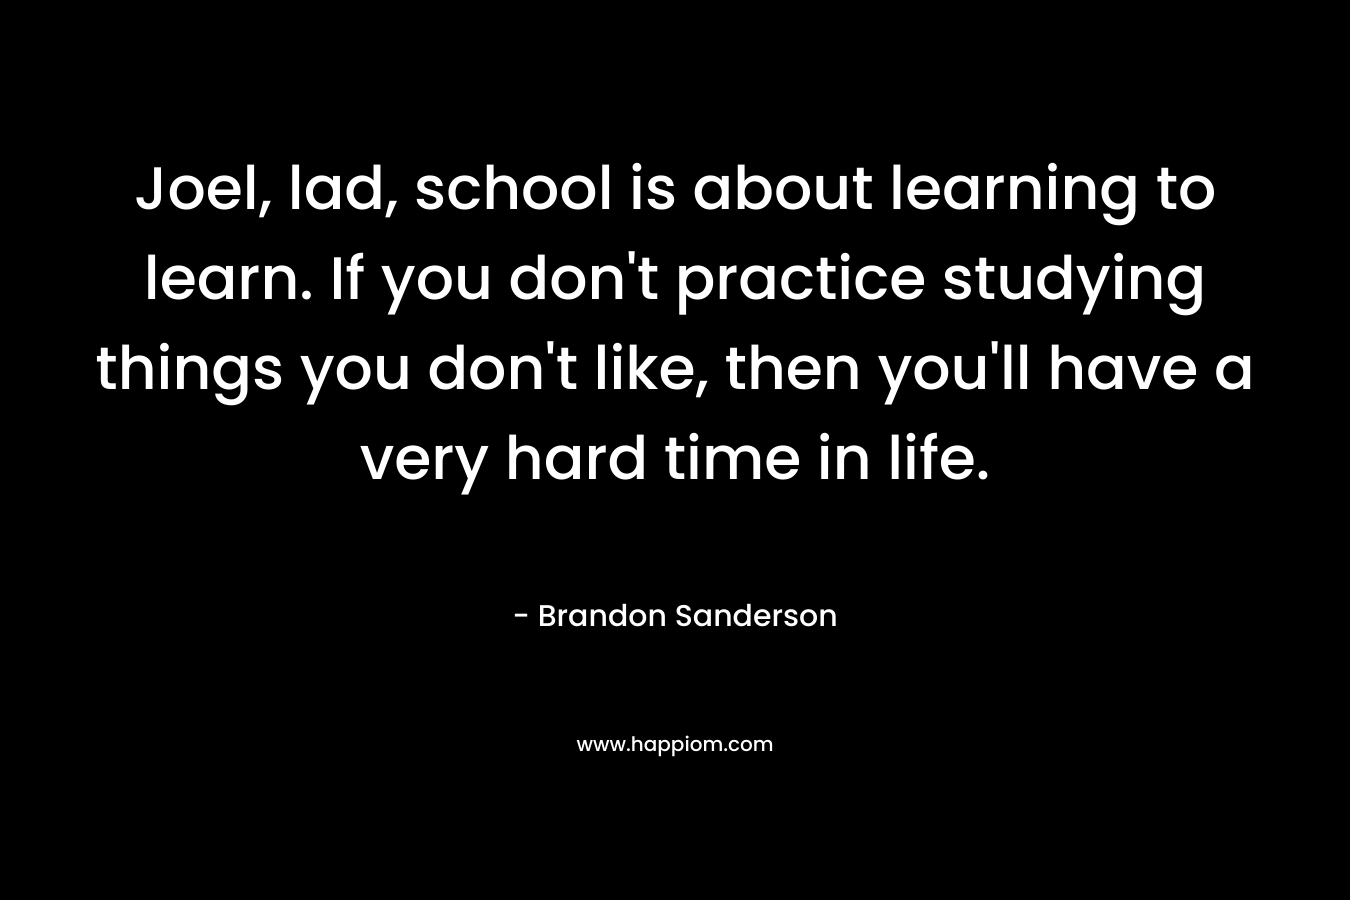 Joel, lad, school is about learning to learn. If you don’t practice studying things you don’t like, then you’ll have a very hard time in life. – Brandon Sanderson